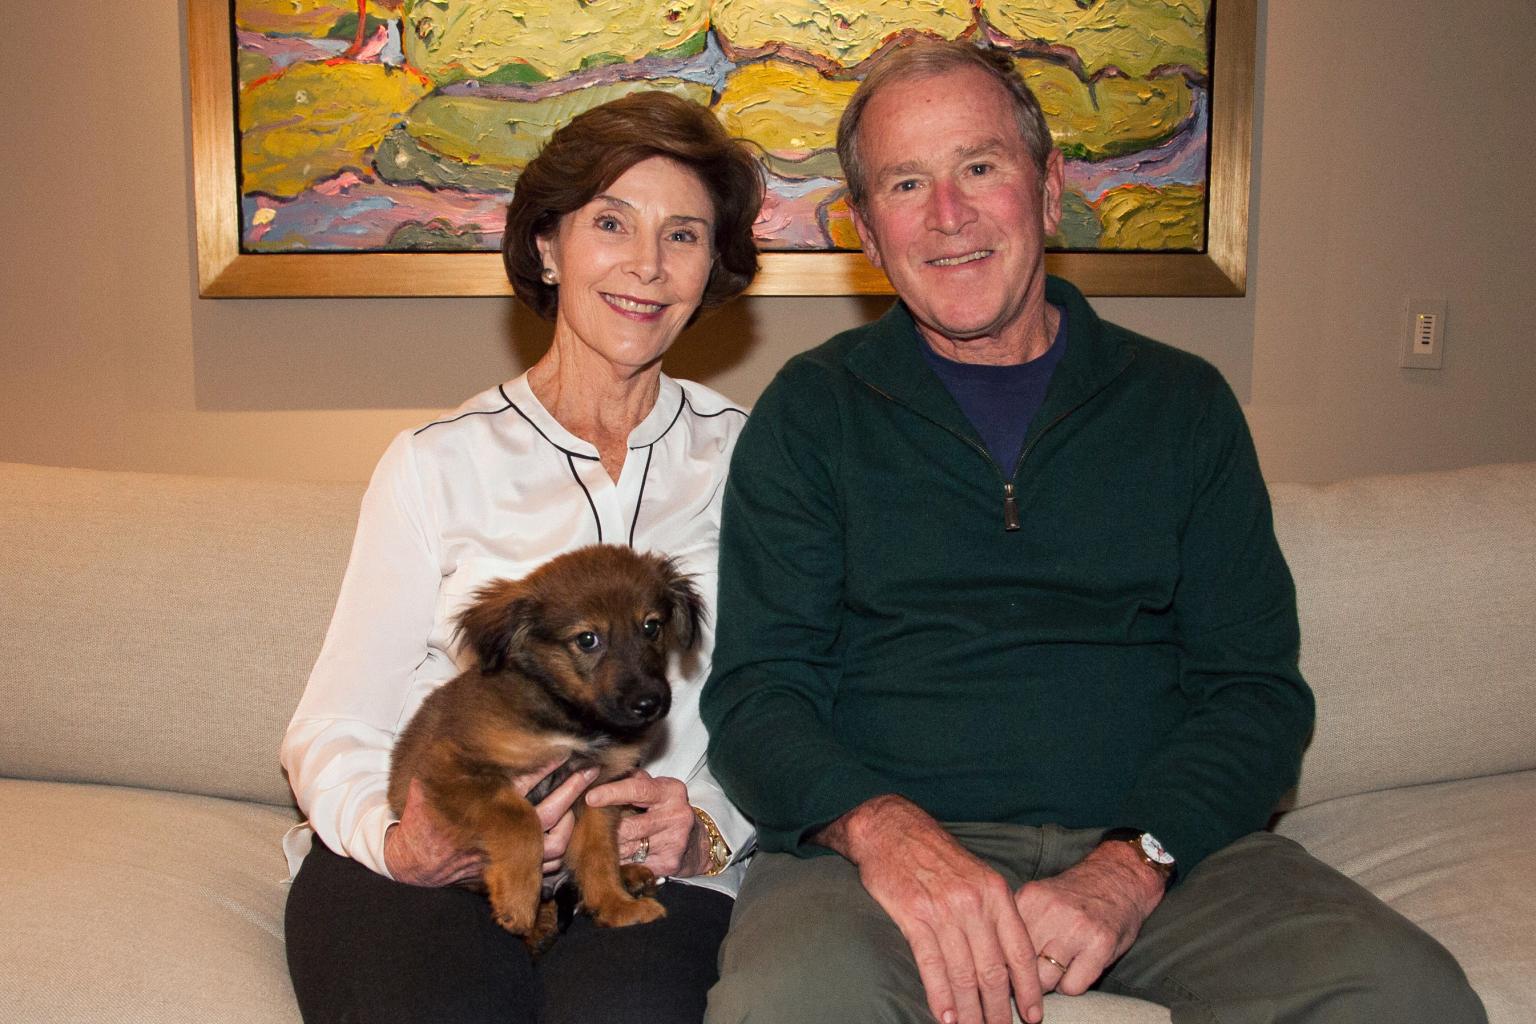 George W. Bush and Wife Laura Adopt Adorable New Puppy Named Freddy